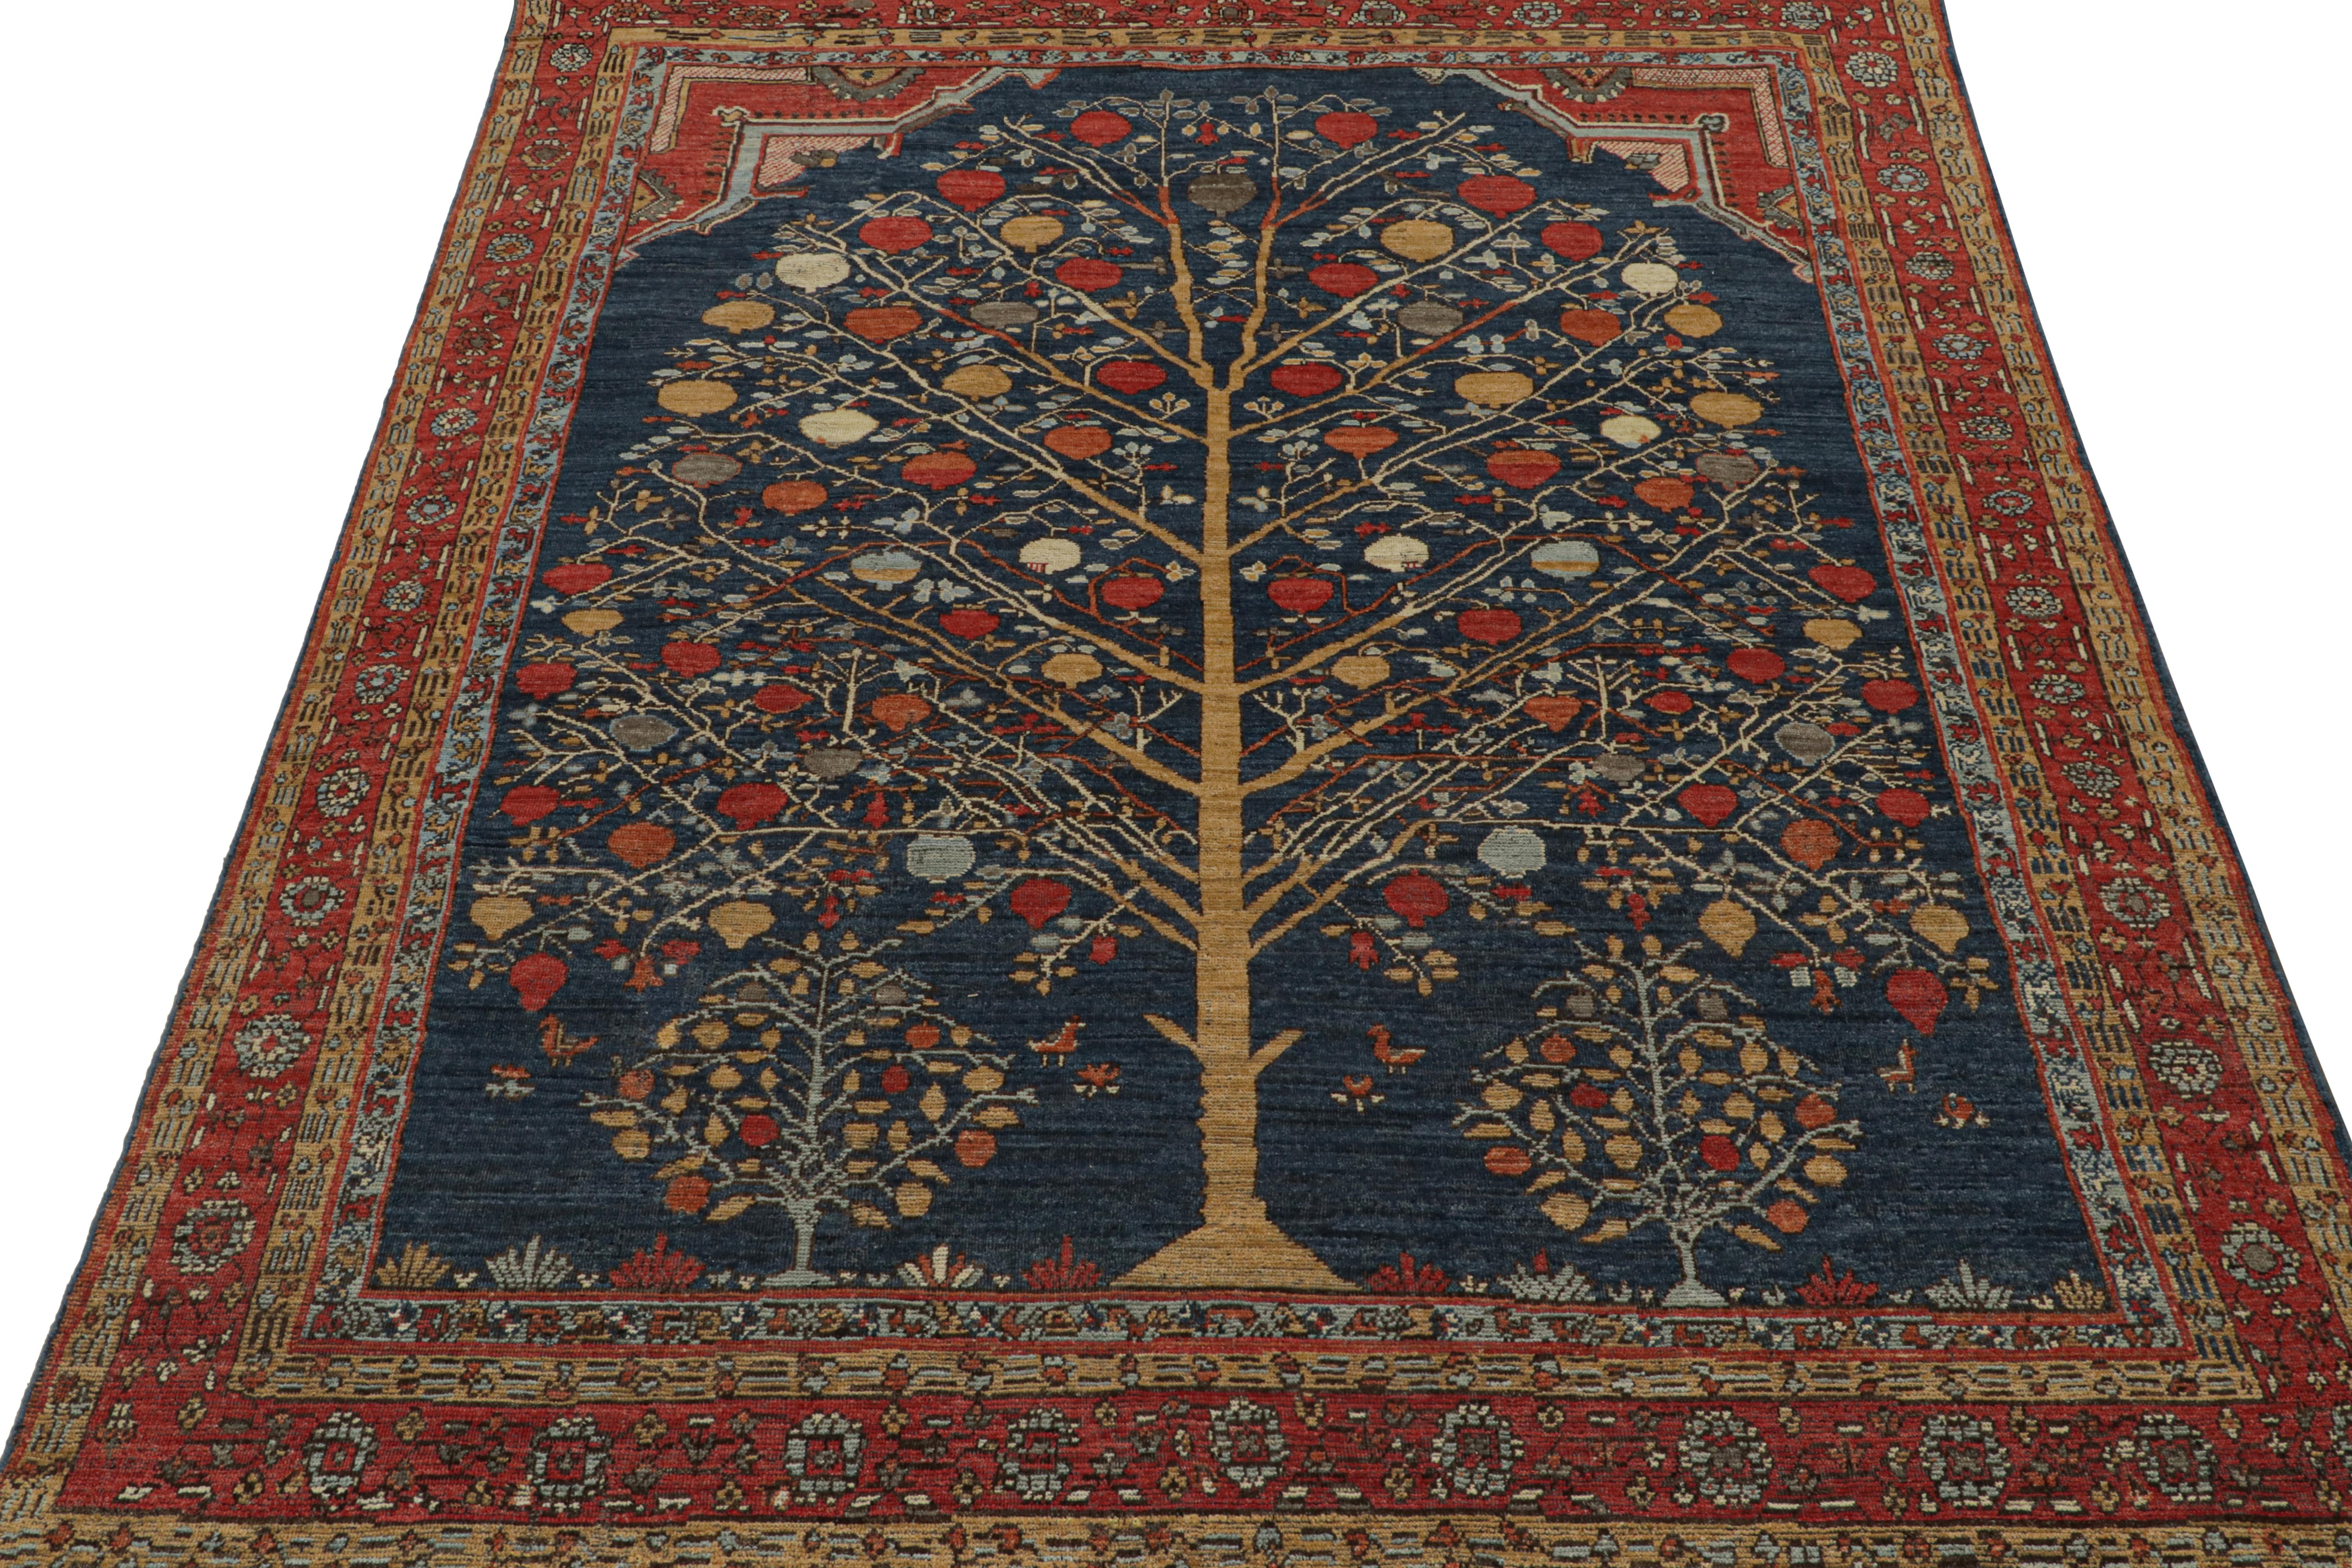 Hand-Knotted Rug & Kilim’s Antique Persian Style Rug In Red, Blue & Gold Pictorials For Sale